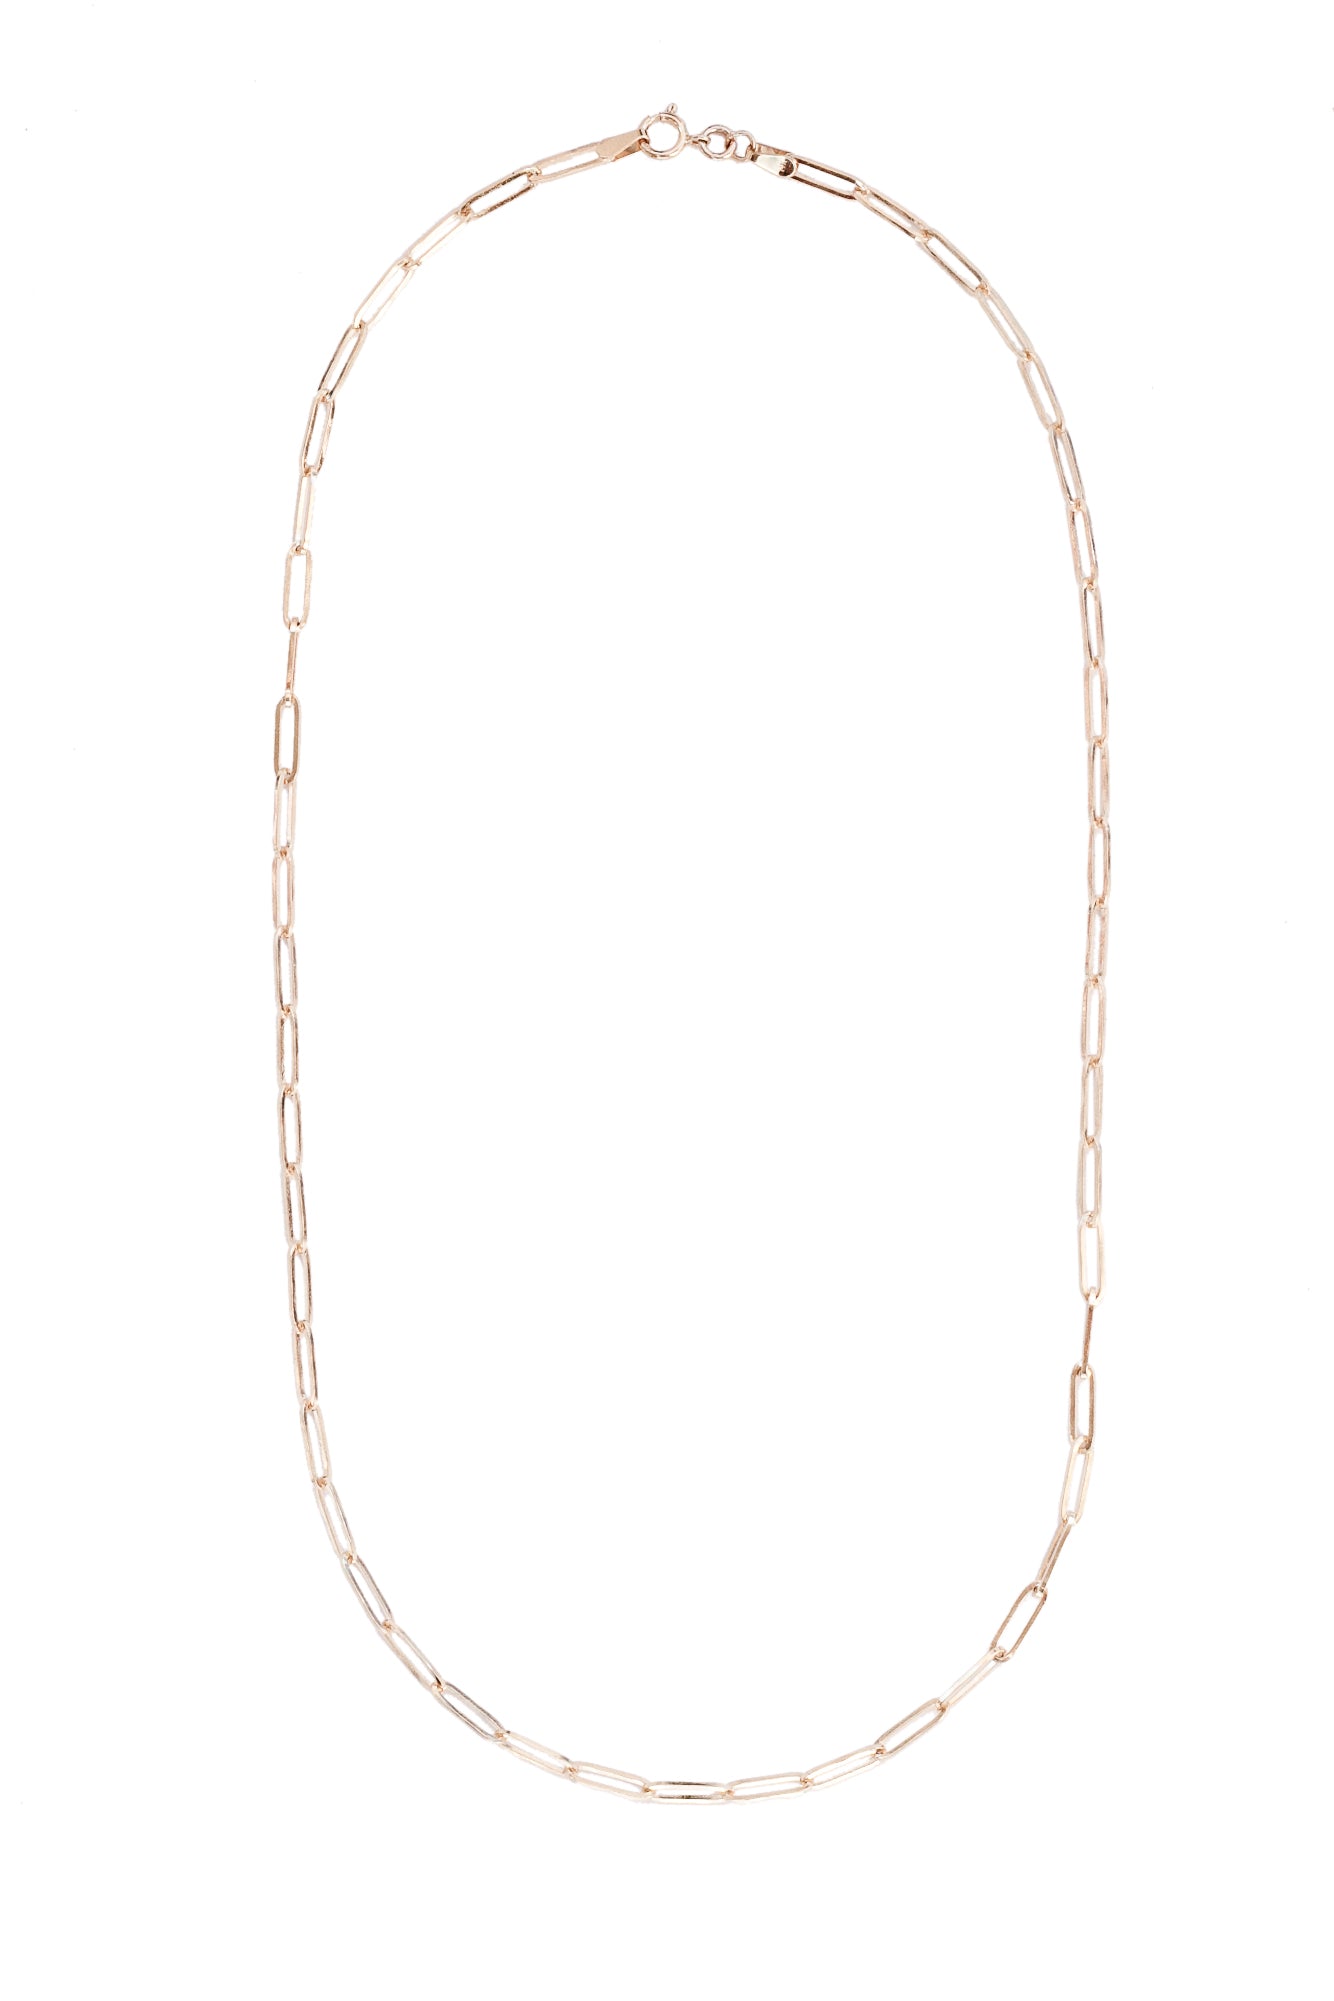 Heather Gardner Paloma Necklace in Yellow Gold - 18"